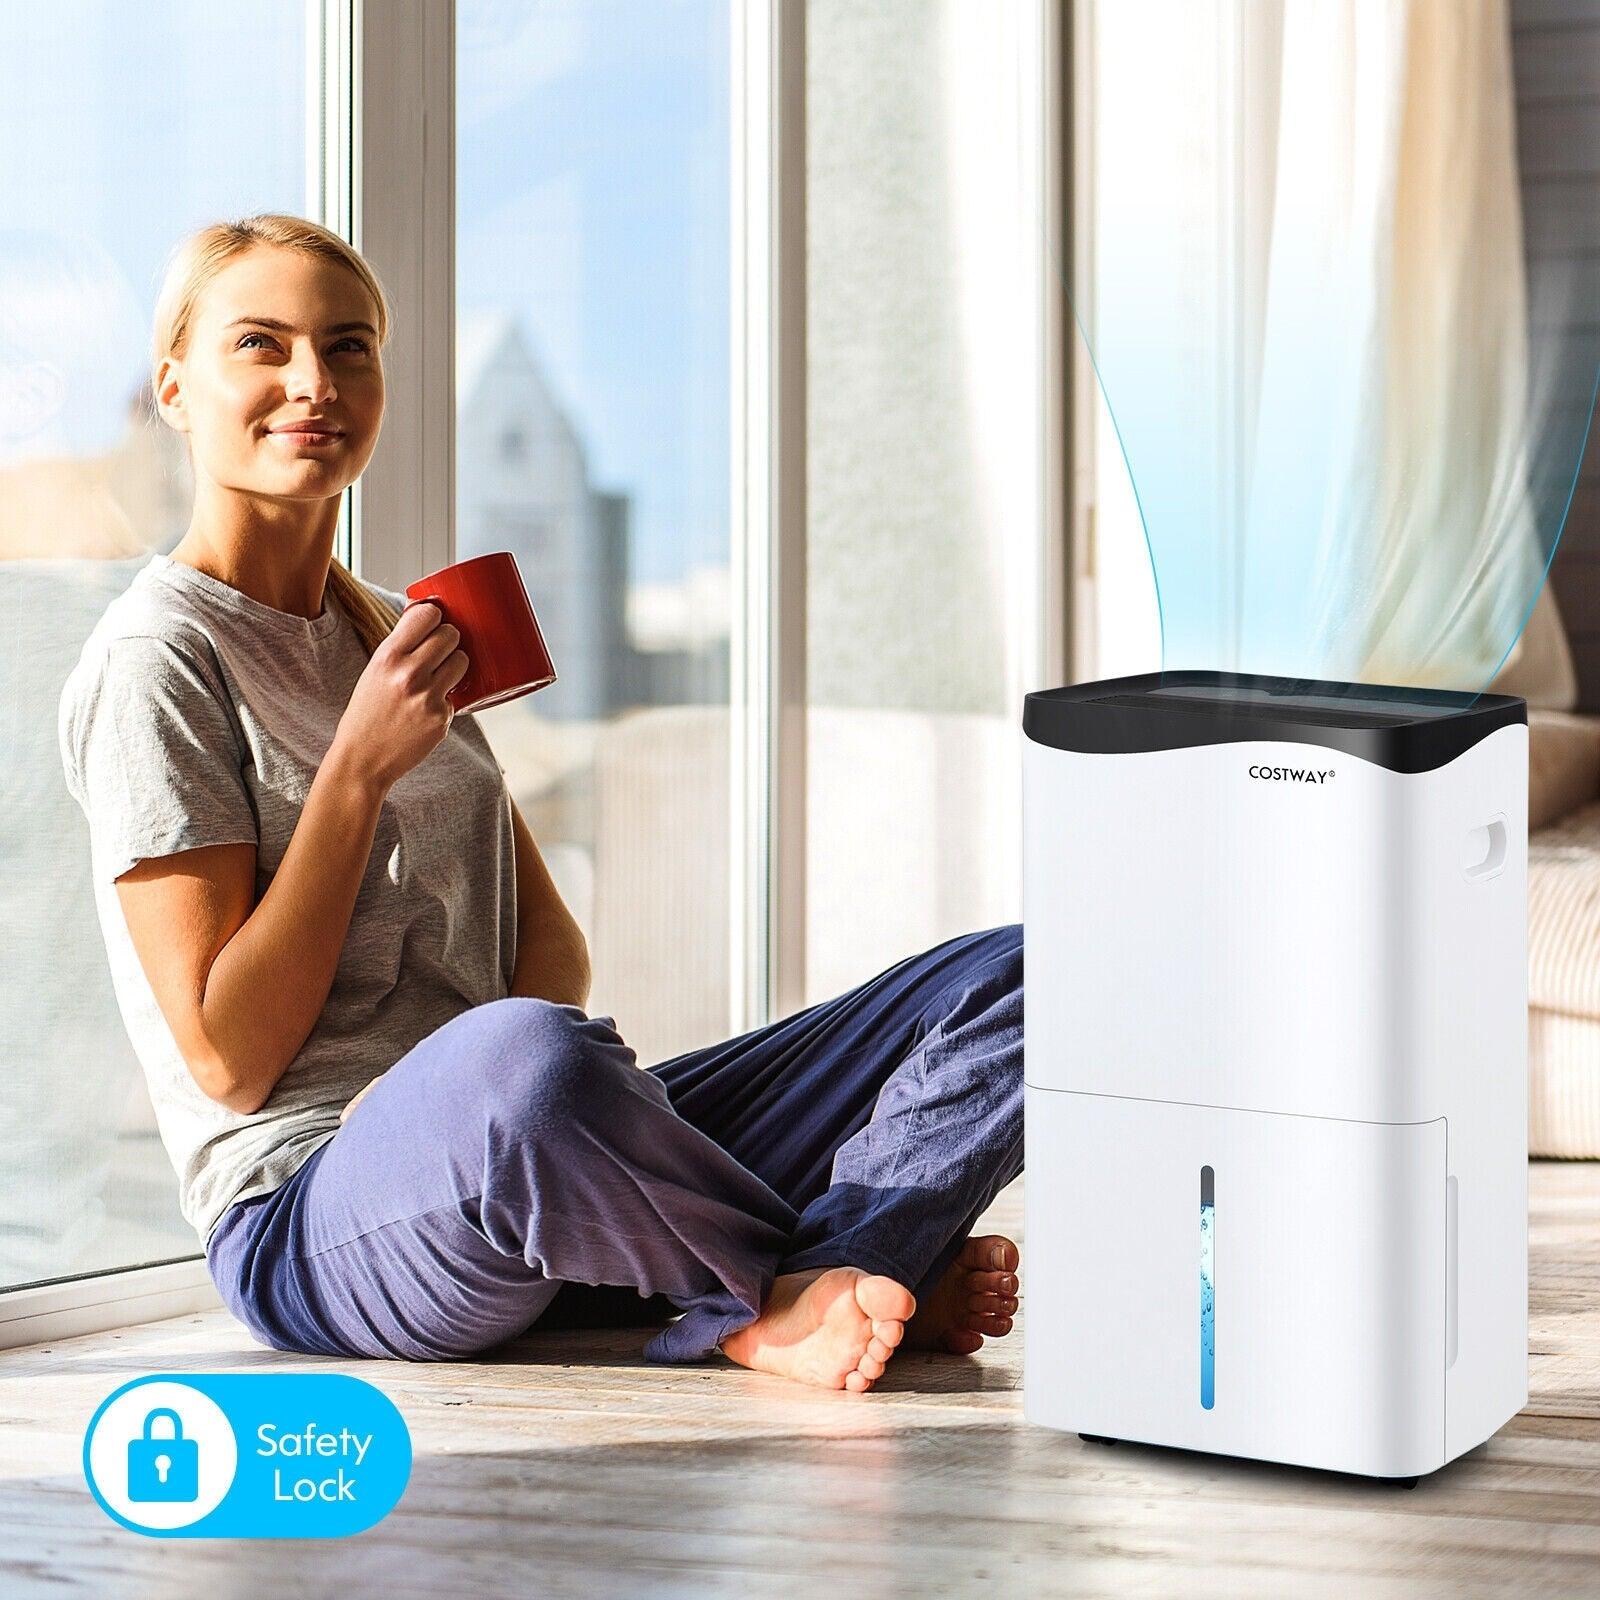 Home 100-Pint Dehumidifier ES10106US-WH,with Smart App